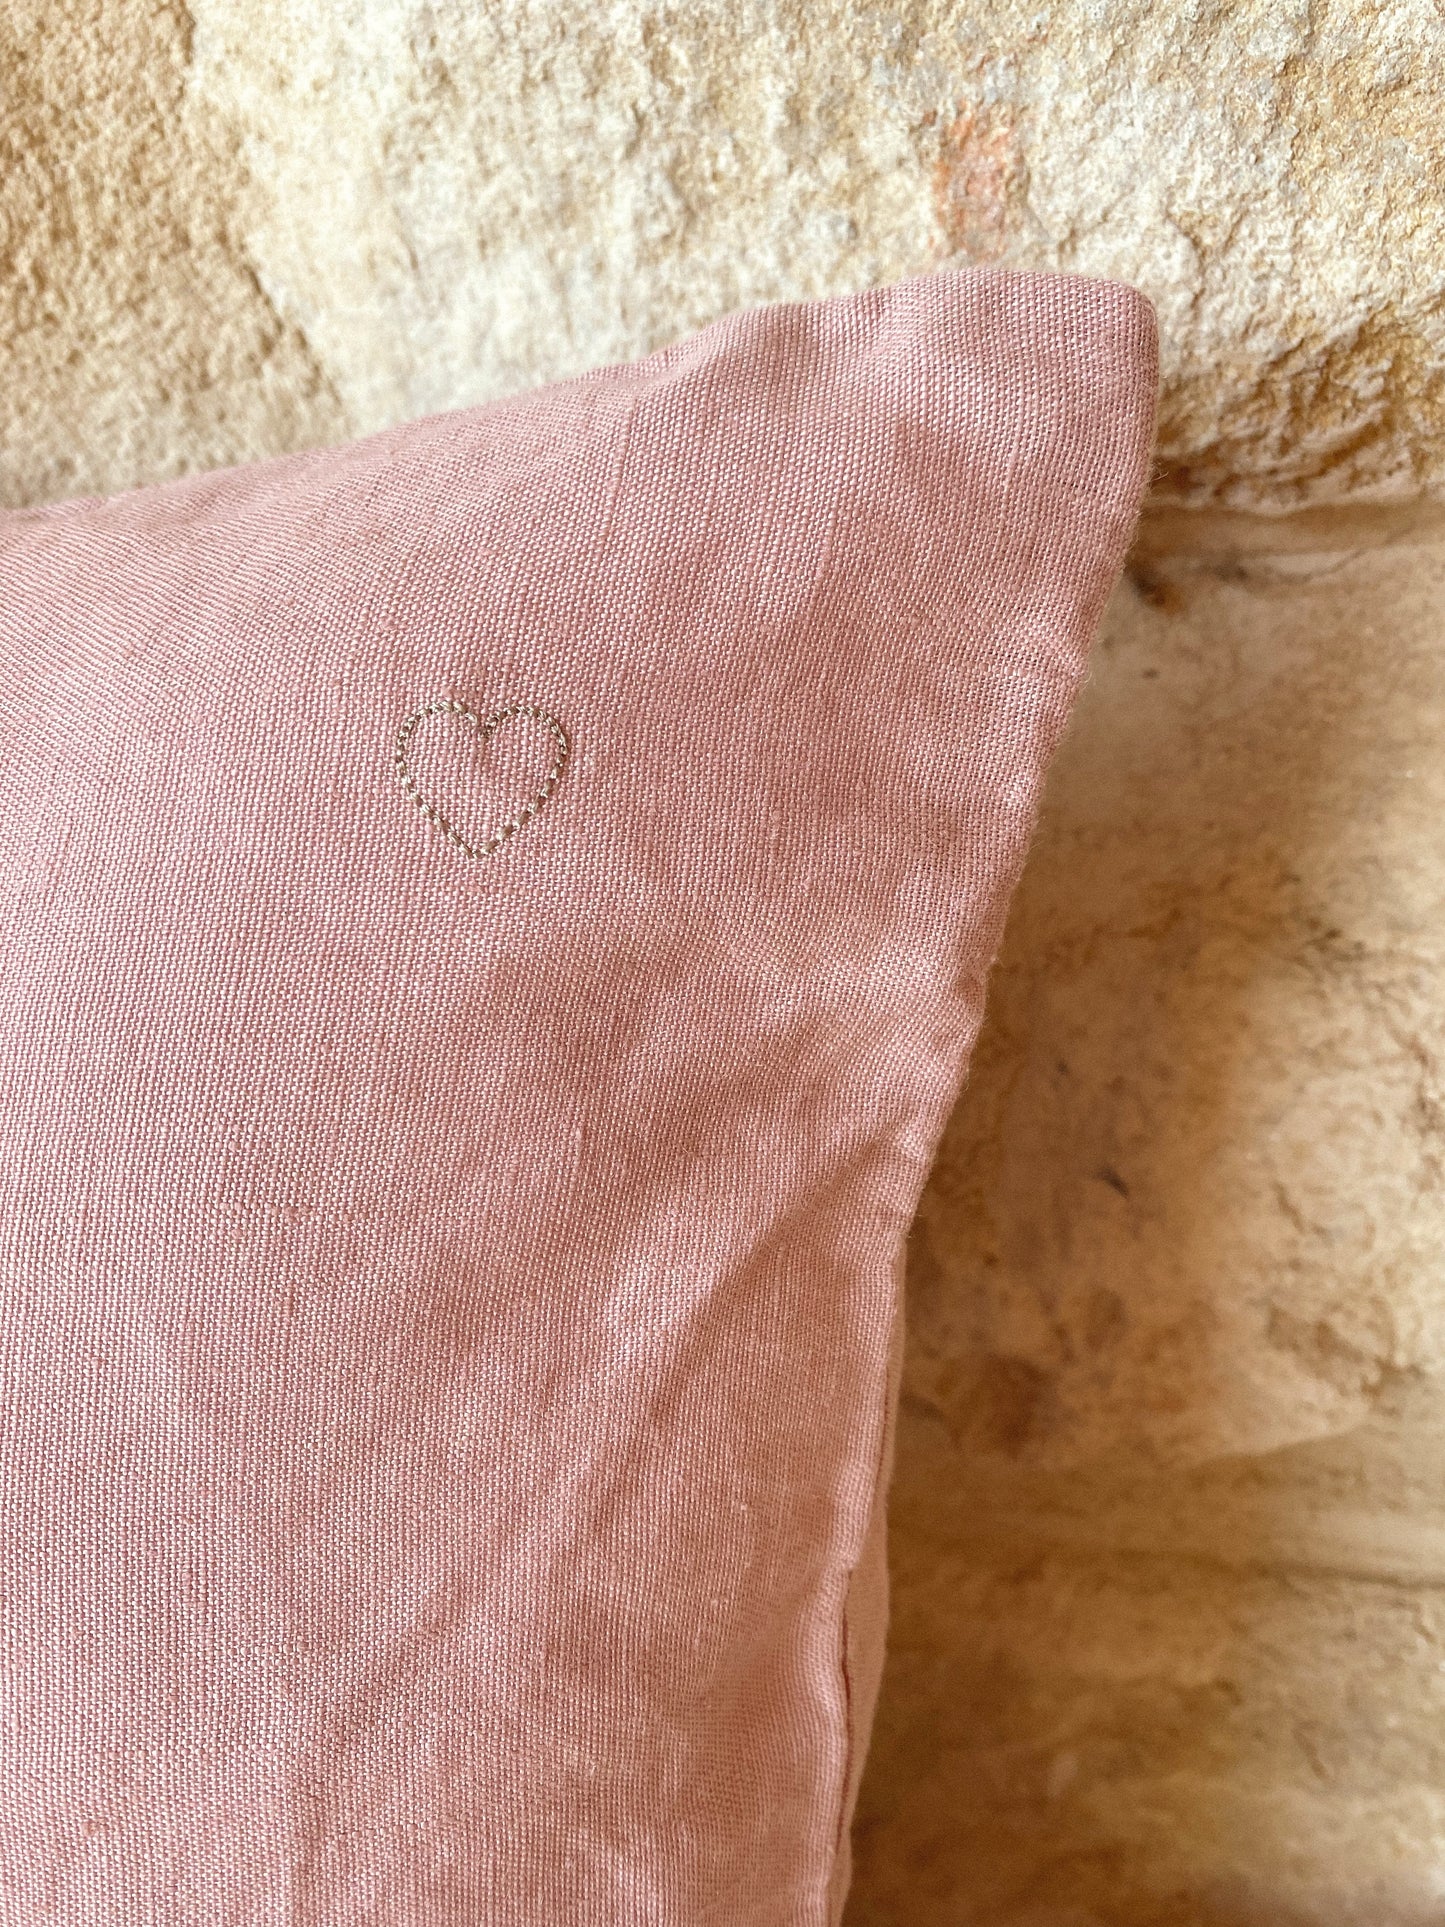 Coussin vieux rose, Amor